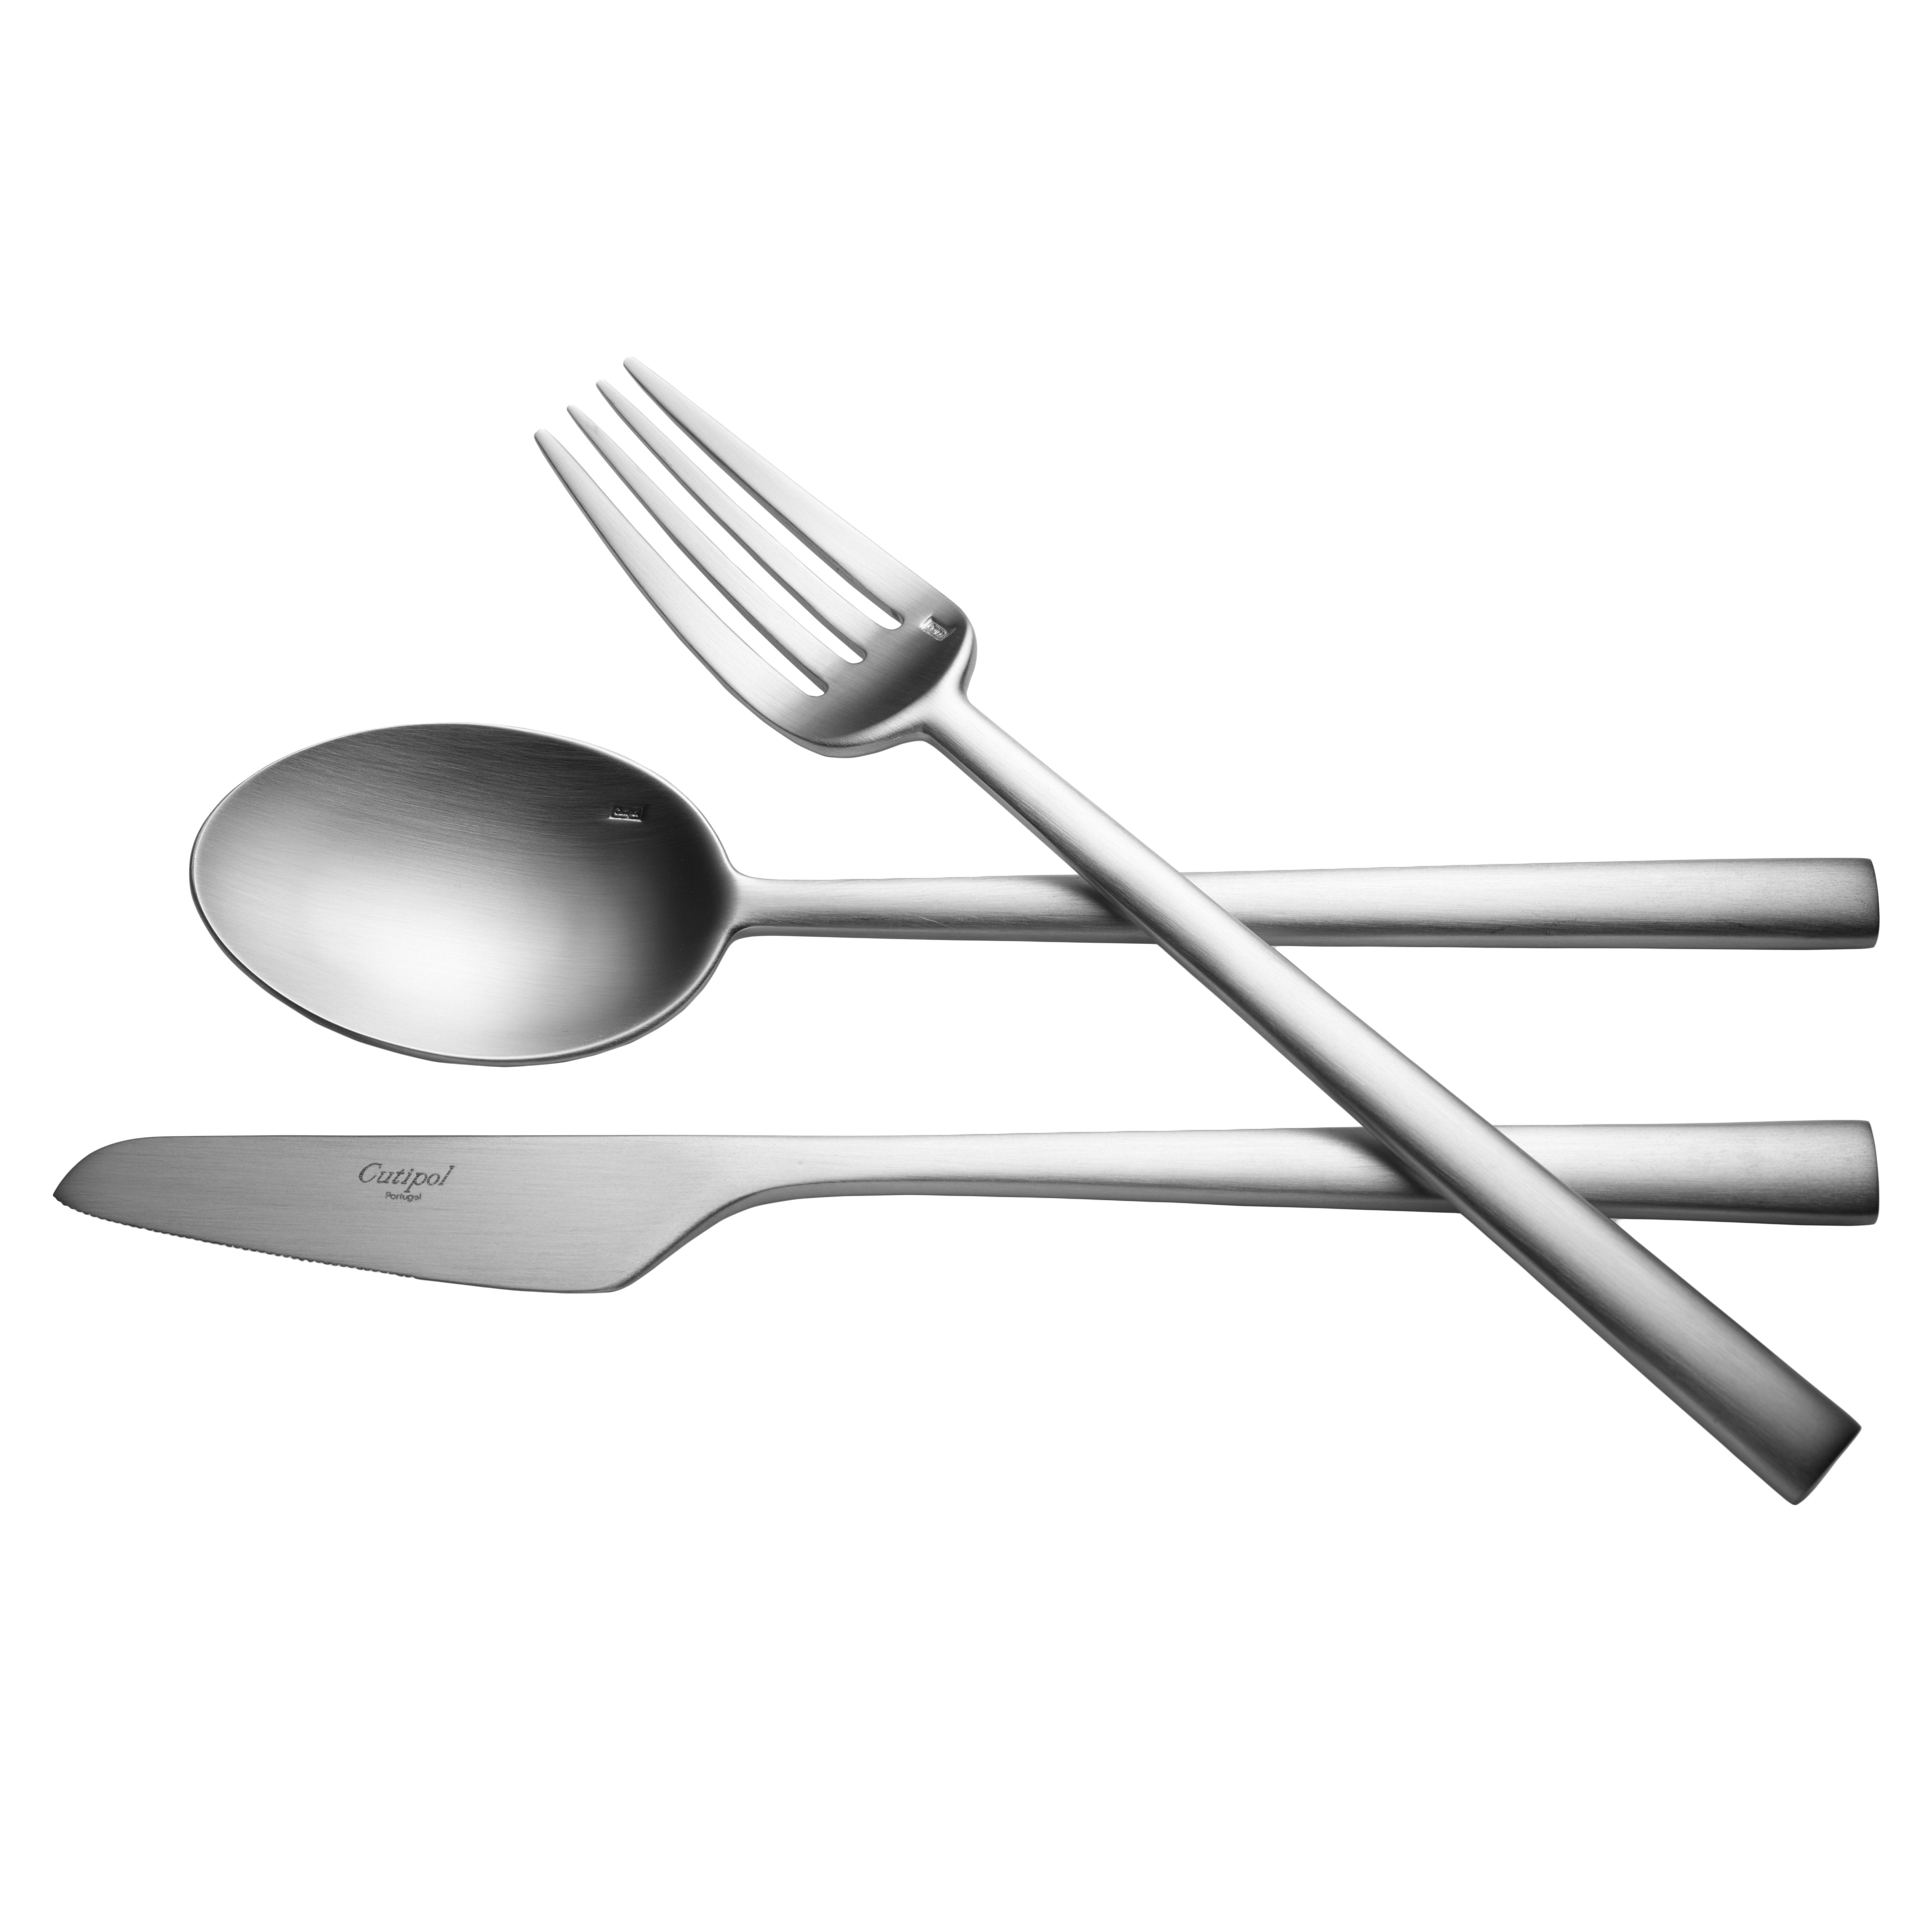 Rondo Flatware: Brushed Steel | Buy Cutipol online at A+R